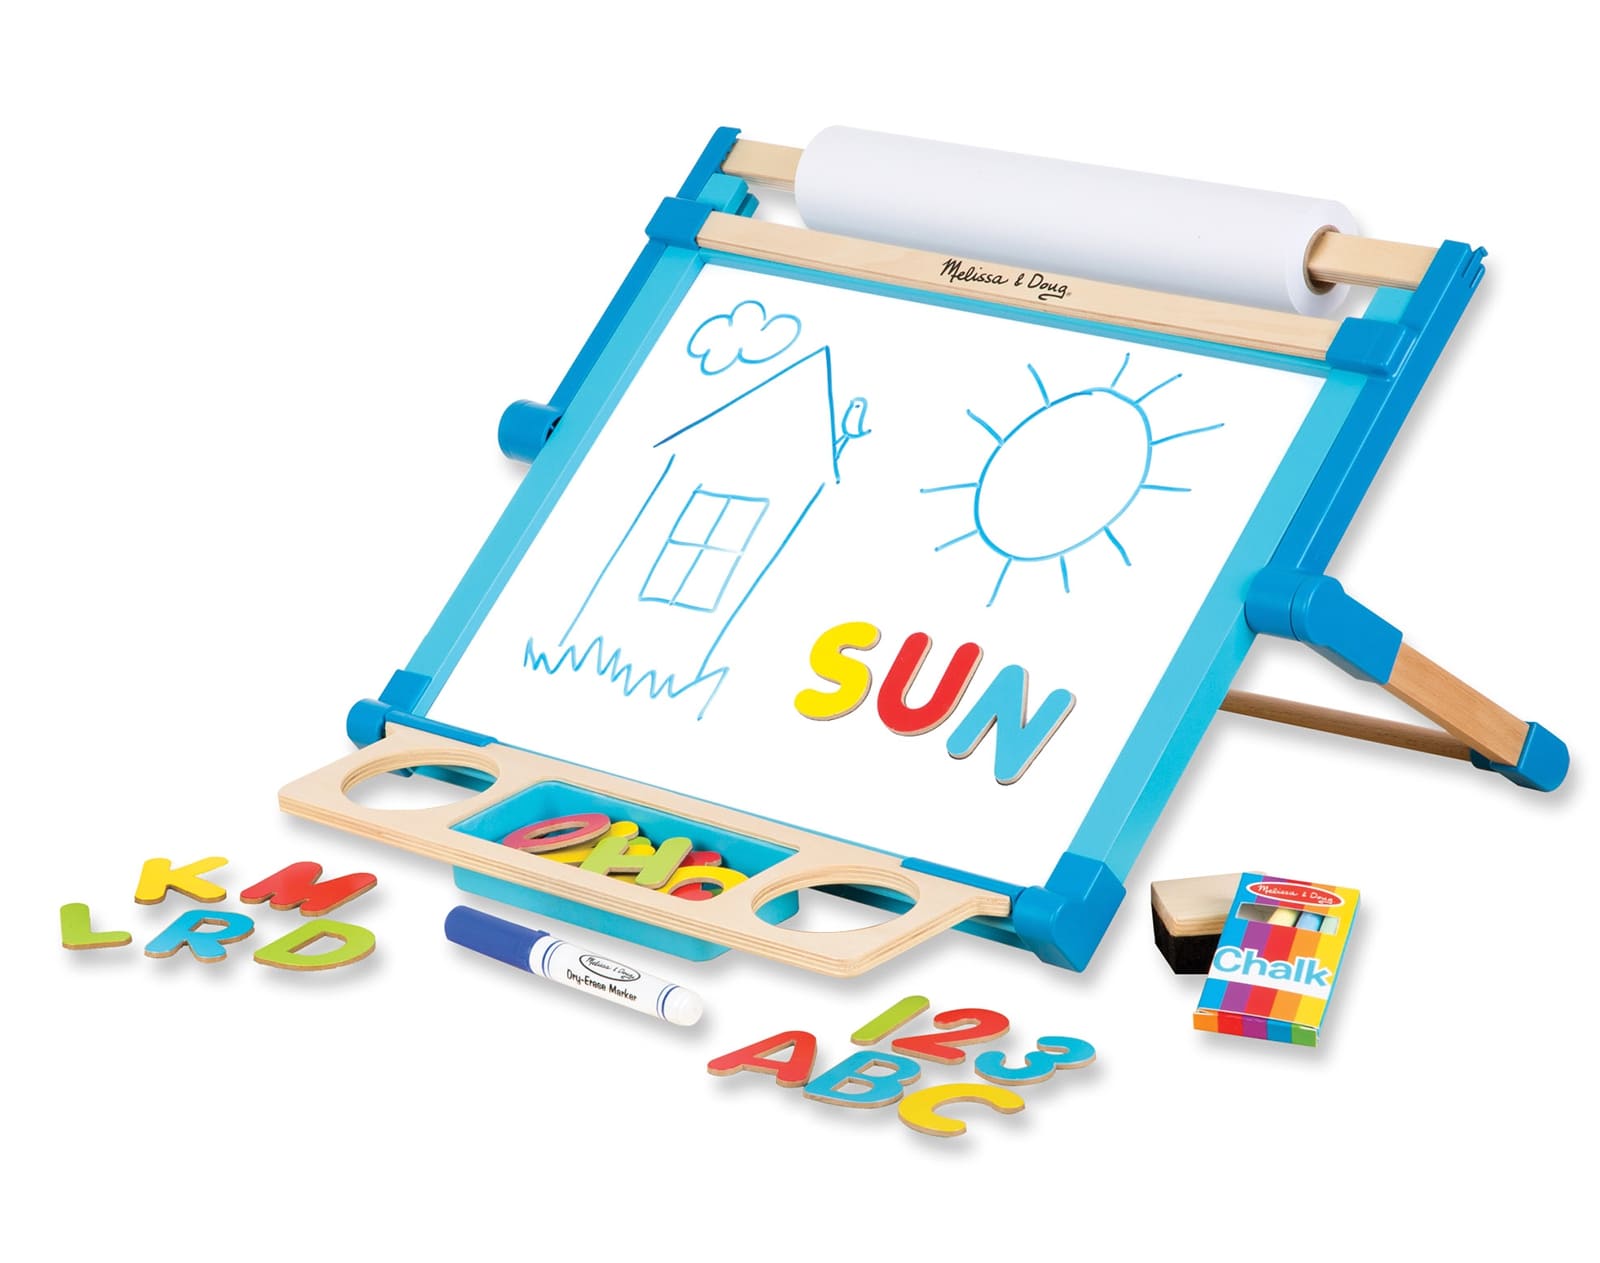  Matty's Toy Stop 2-in-1 Mini Wooden Tabletop Easel